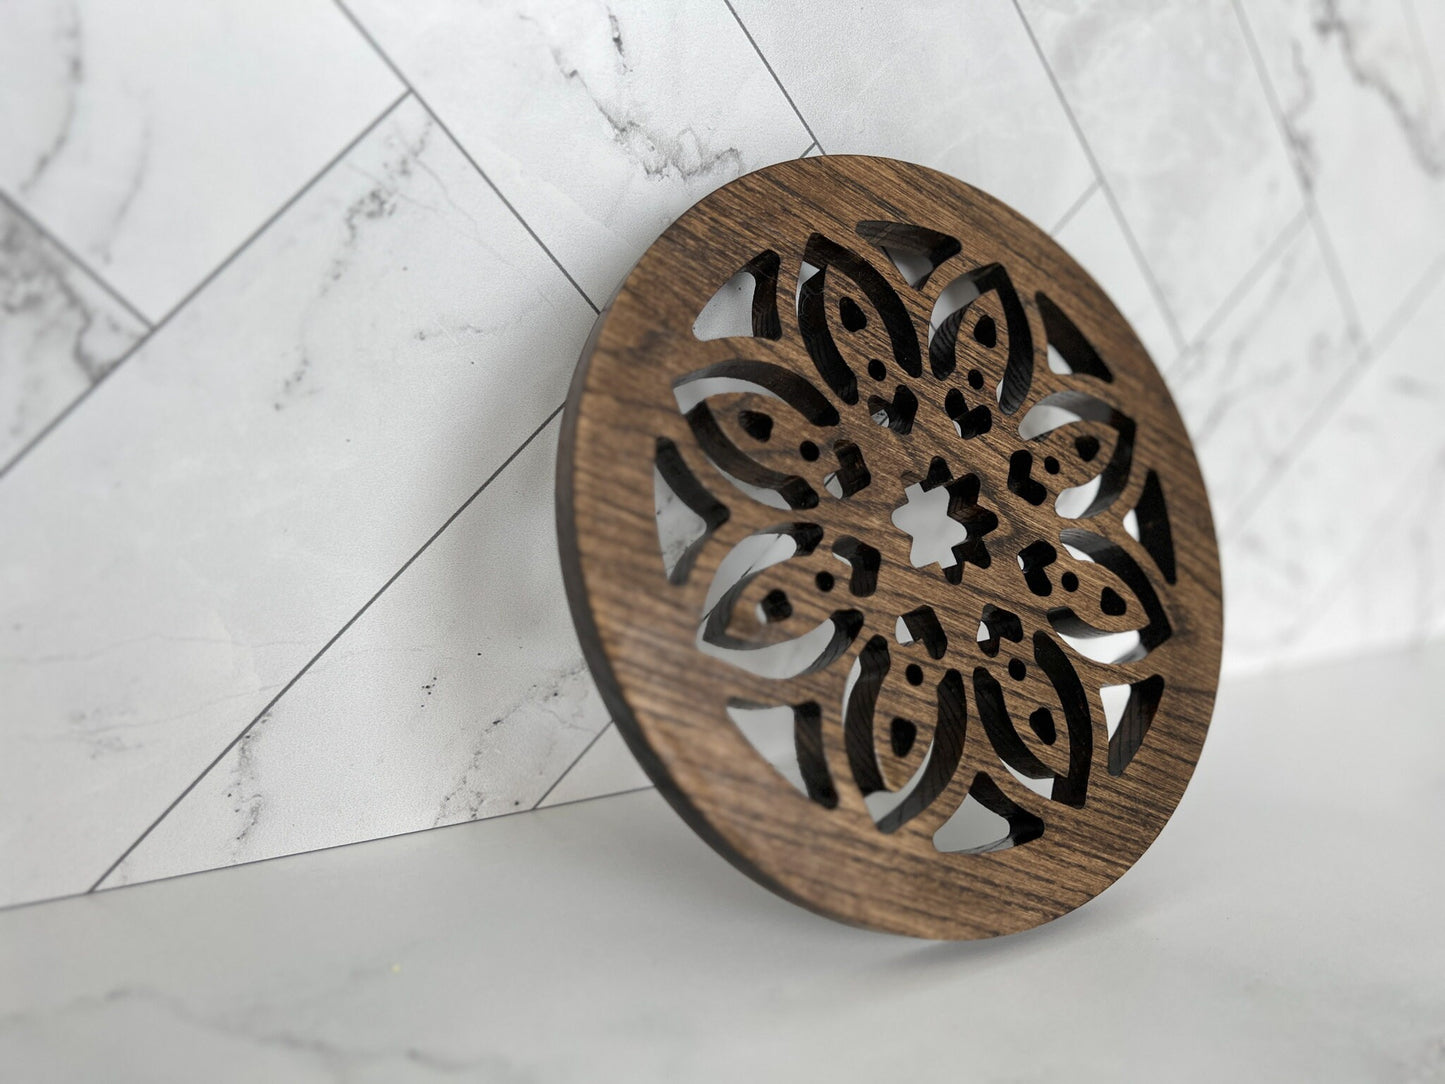 Flower Cutout Wooden Trivet, Serving Tray, Wood Trivet for Dining Table, Dining Accessories, Wood Gifts, Hot Tray, Pot Holder